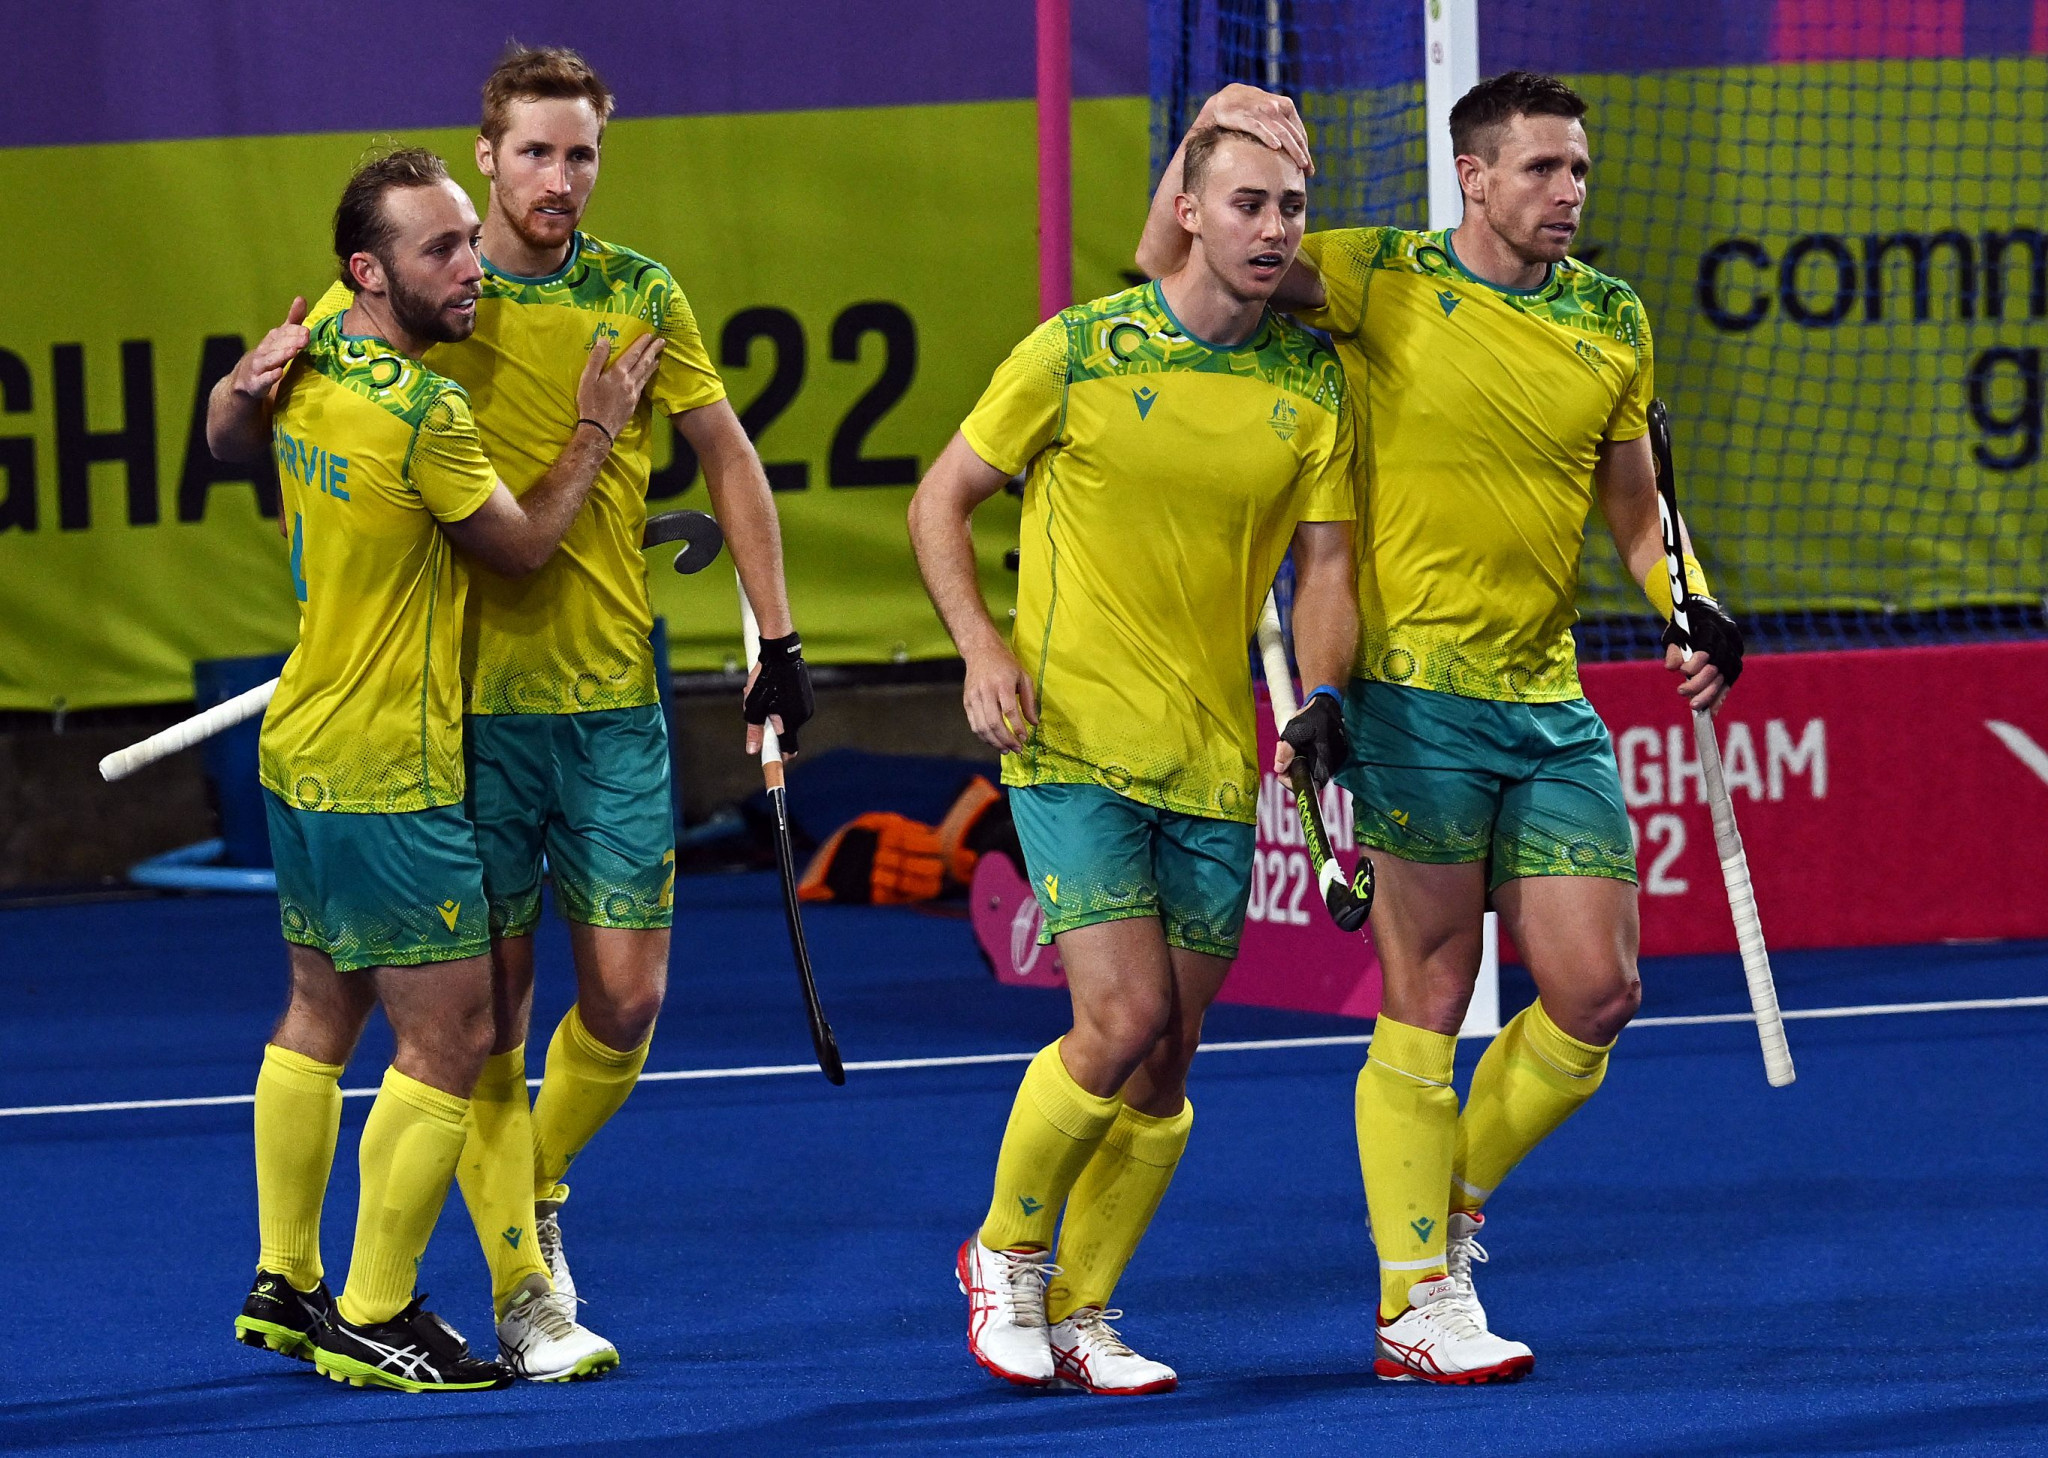 Australia came from two goals behind to beat England and reach the men's hockey final at Birmingham 2022 ©Getty Images